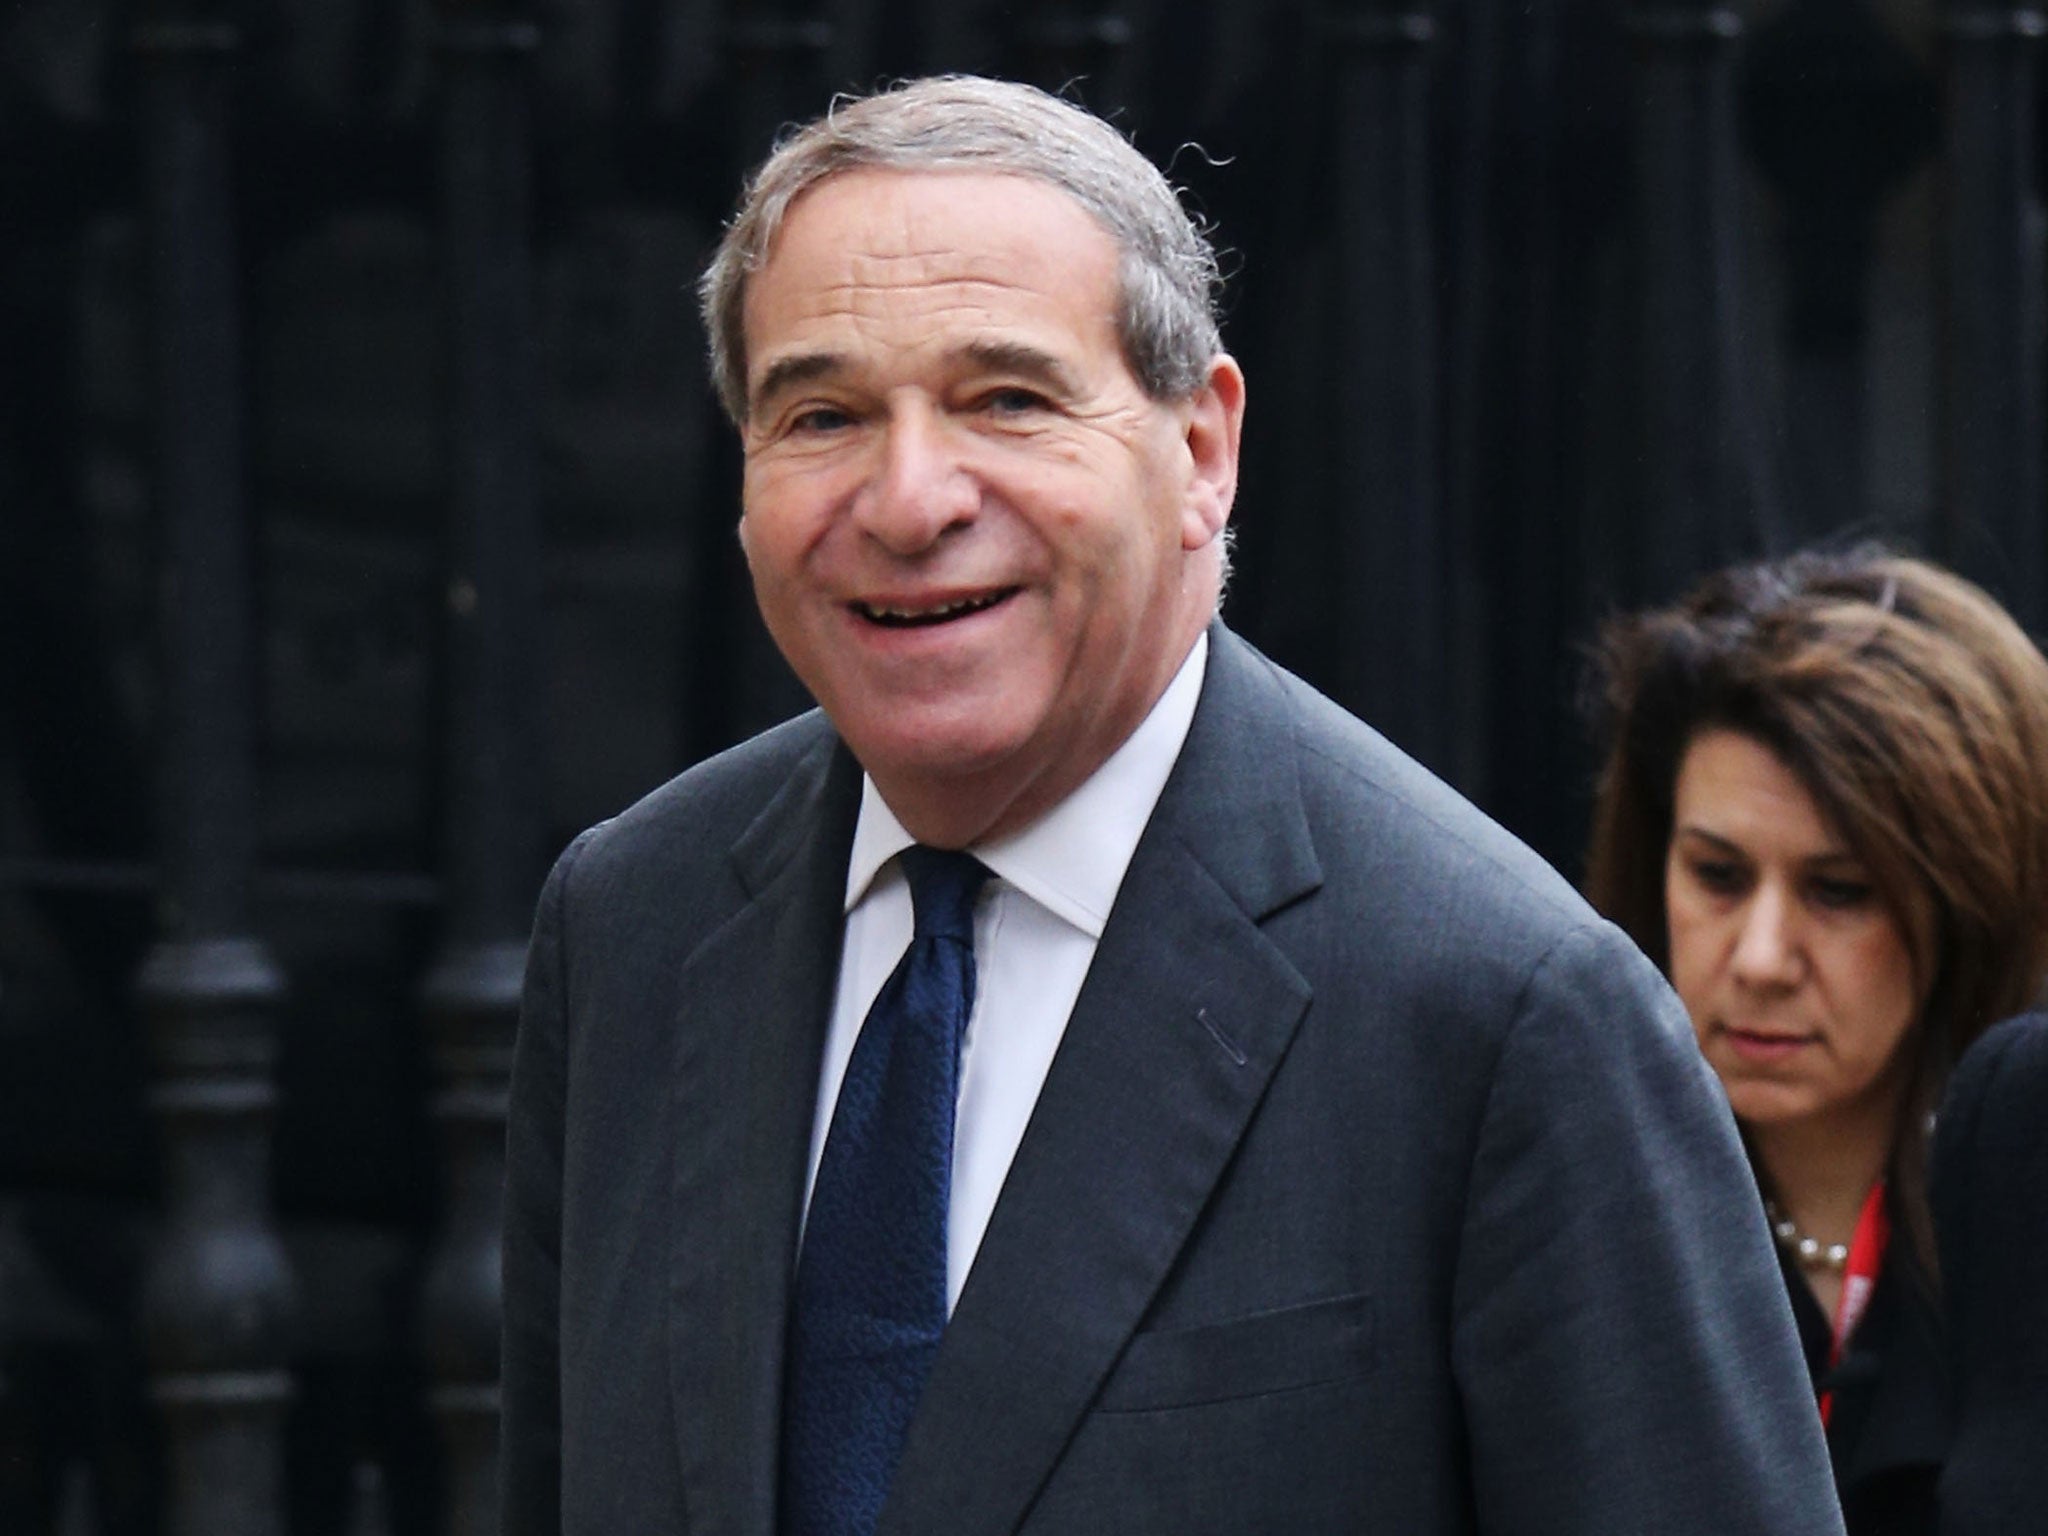 Leon Brittan was at the centre of allegations concerning a dossier of child sex allegations which went missing. Brittan denied that he had failed to act on information he received